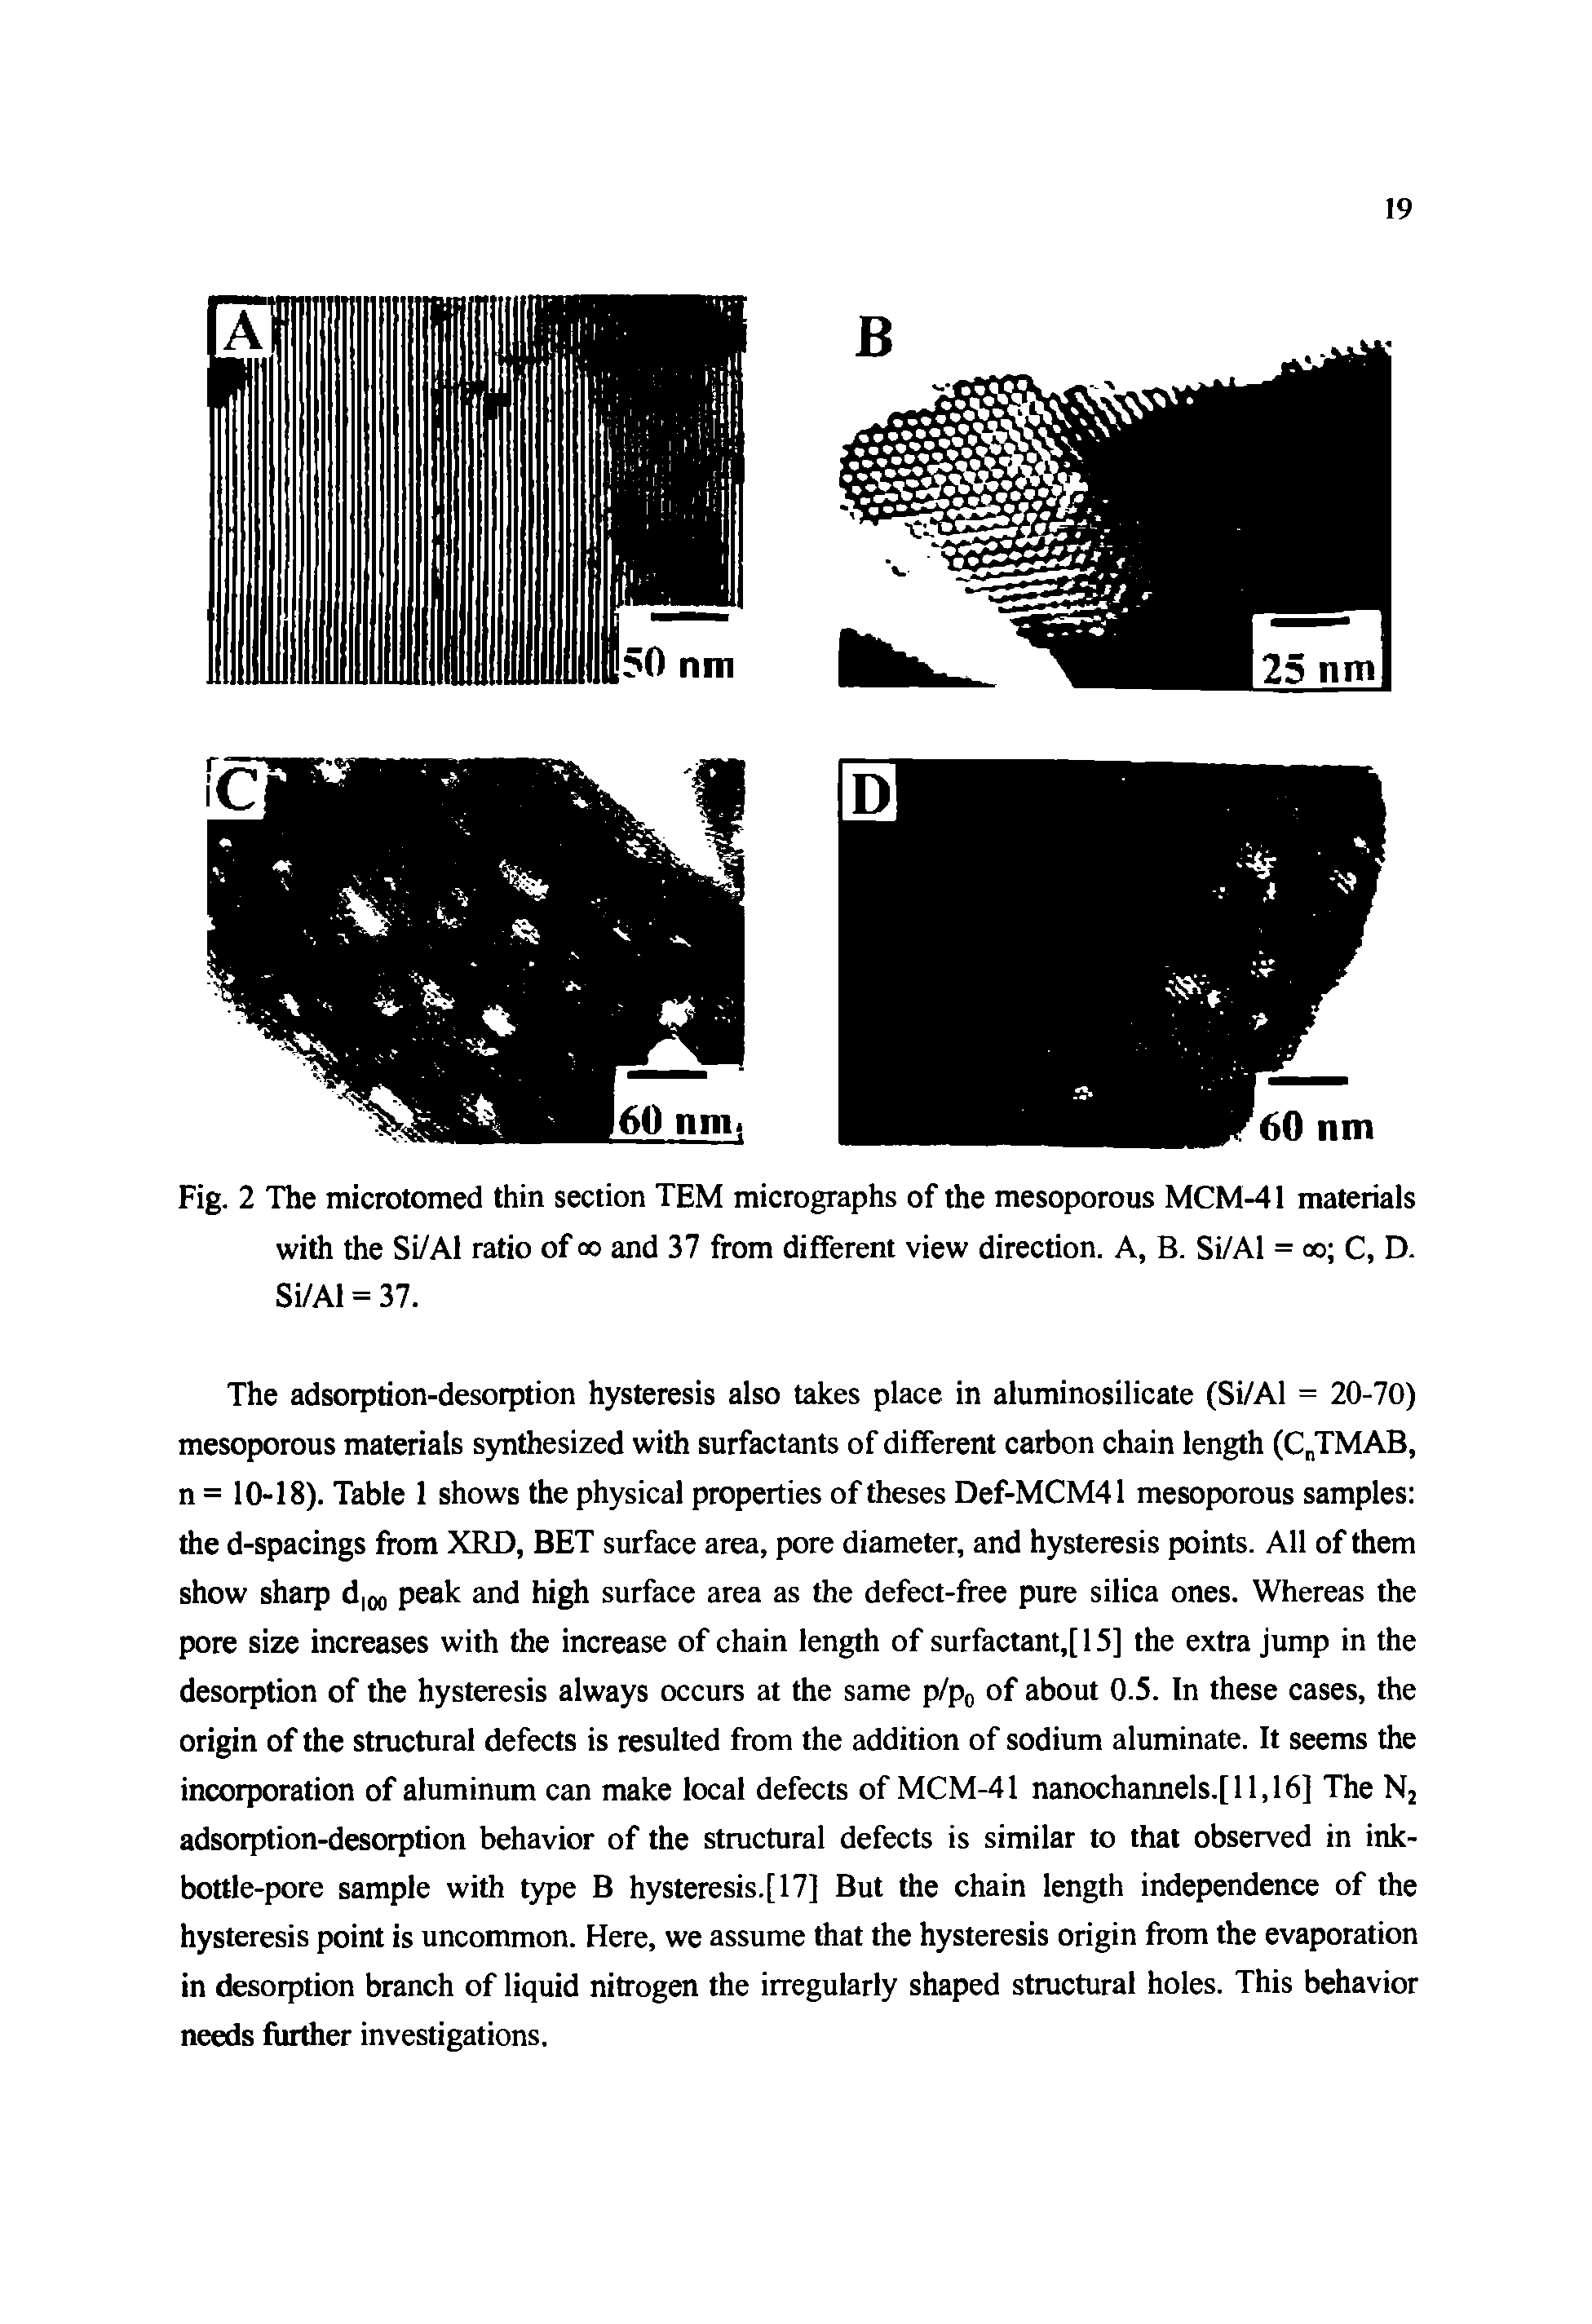 Fig. 2 The microtomed thin section TEM micrographs of the mesoporous MCM-41 materials with the Si/Al ratio of oo and 37 from different view direction. A, B. Si/Al = oo C, D. Si/Al = 37.